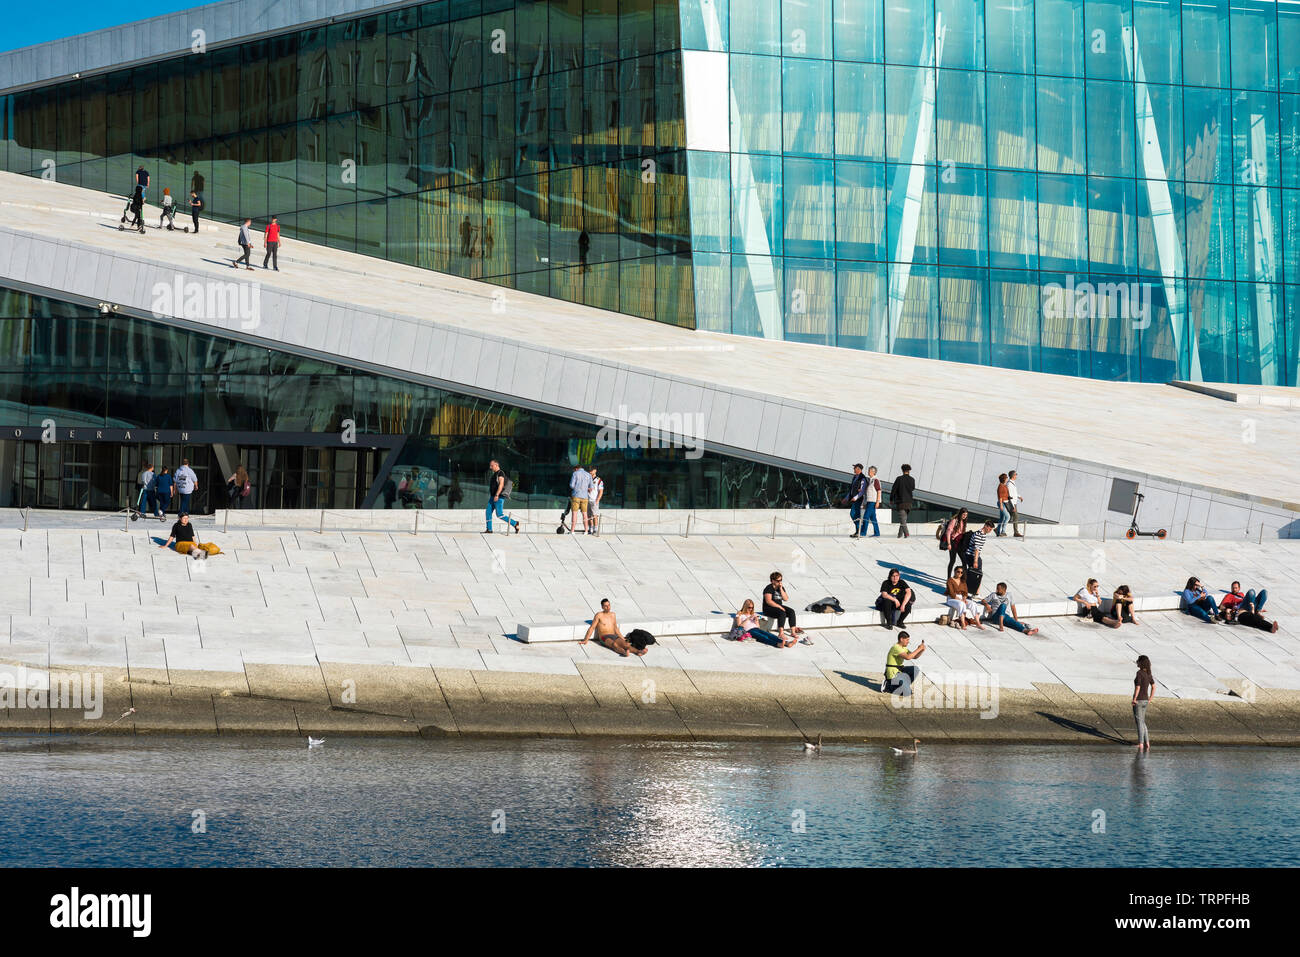 Oslo Opera House, waterfront view in summer of people sunbathing or walking on the vast access ramp leading to the roof of the Oslo Opera House. Stock Photo